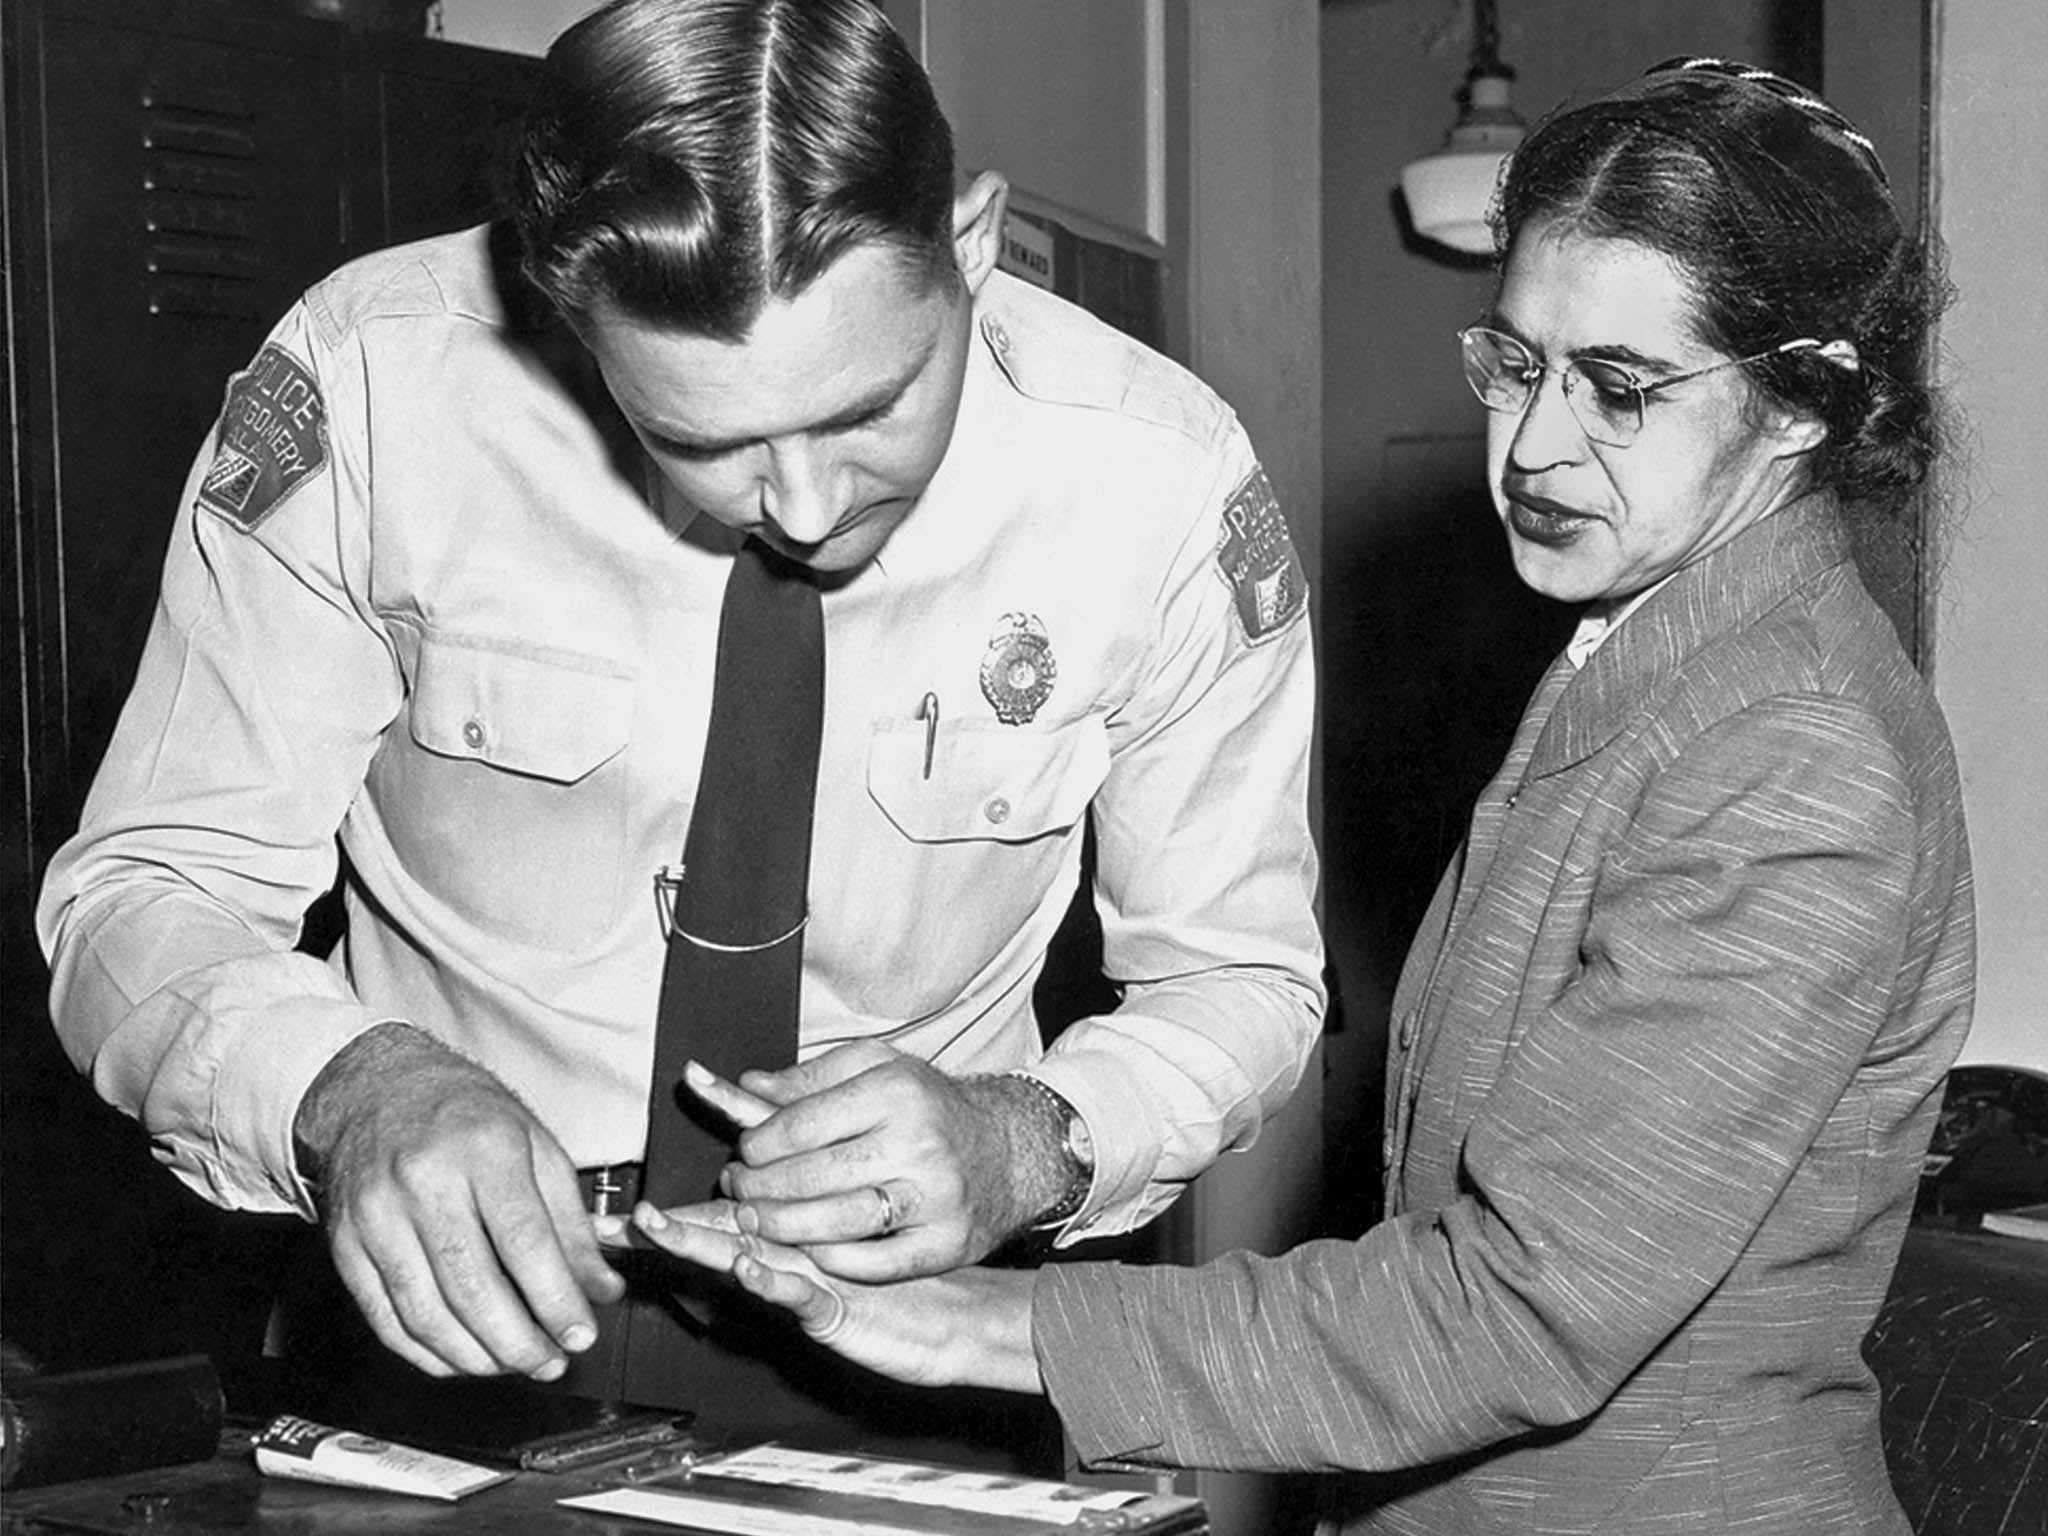 Rosa Parks has her fingerprint taken after refusing to give up her seat on a bus to a white passenger